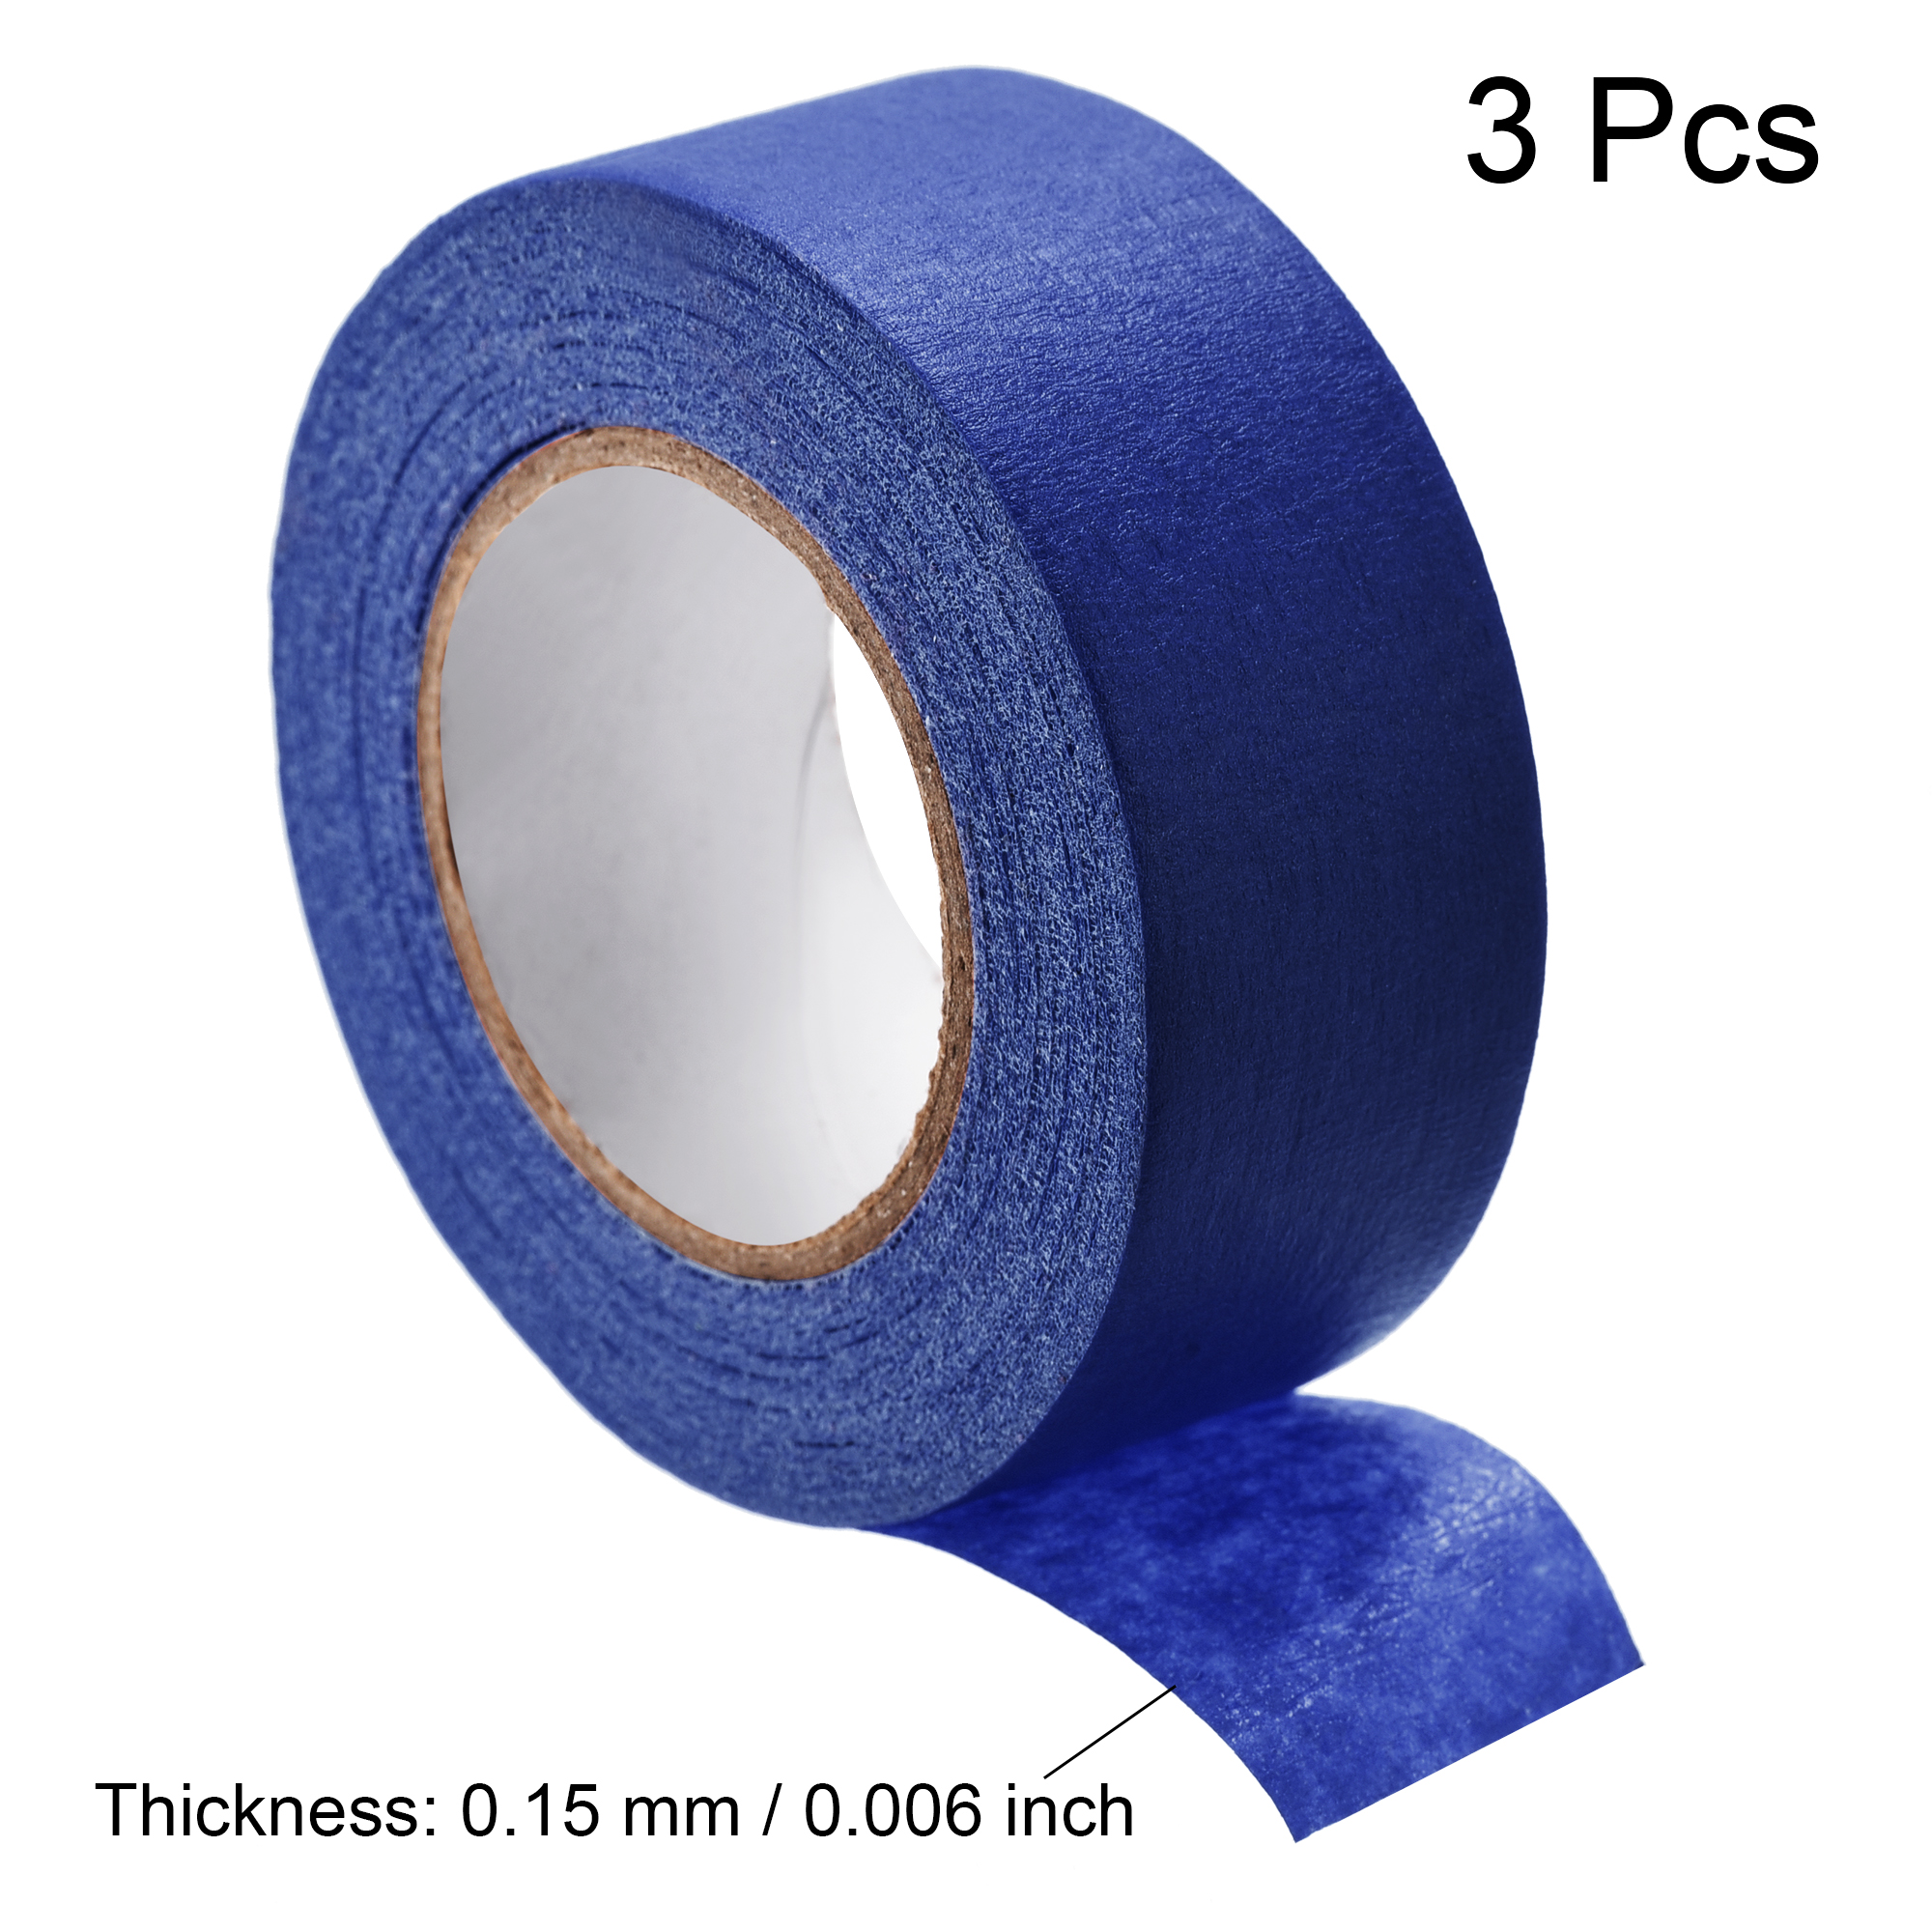 Uxcell 3Pcs 25mm inch Wide 20m 21 Yards Masking Tape Painters Tape Rolls  Dark Blue